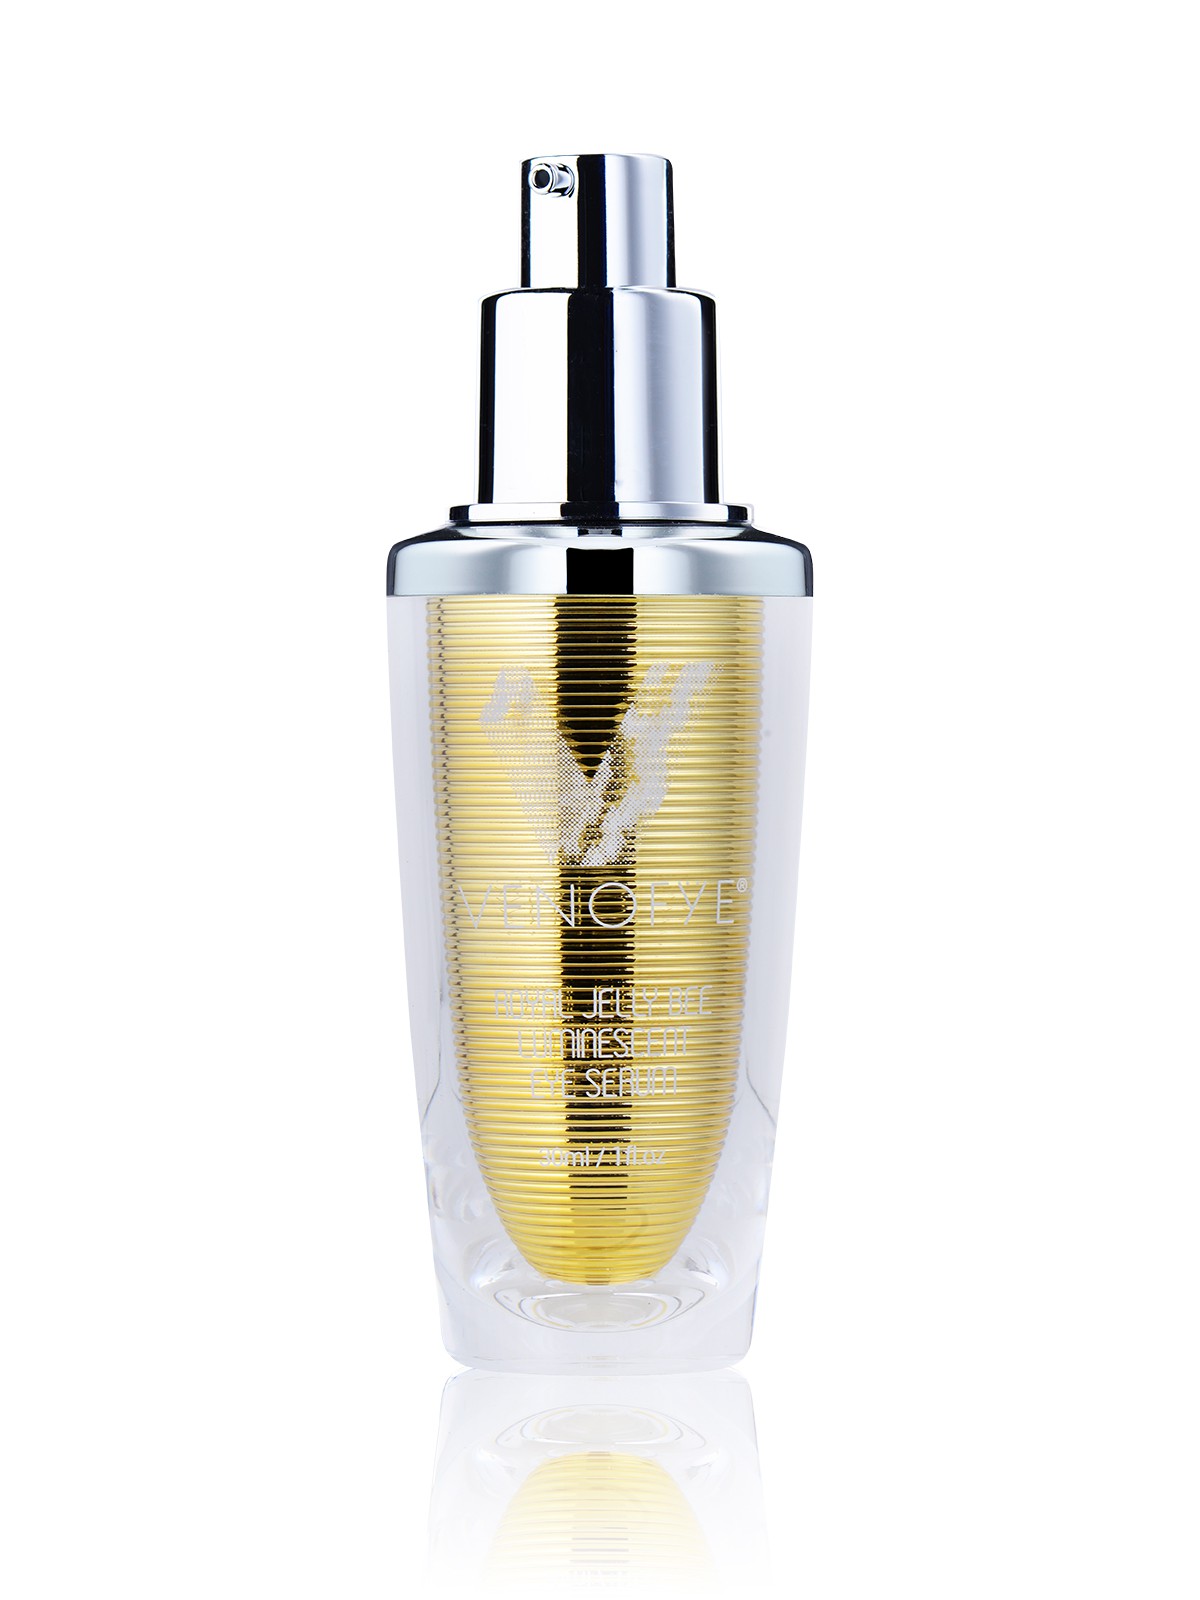 Royal Jelly Bee Luminescent Eye Serum with removed lid